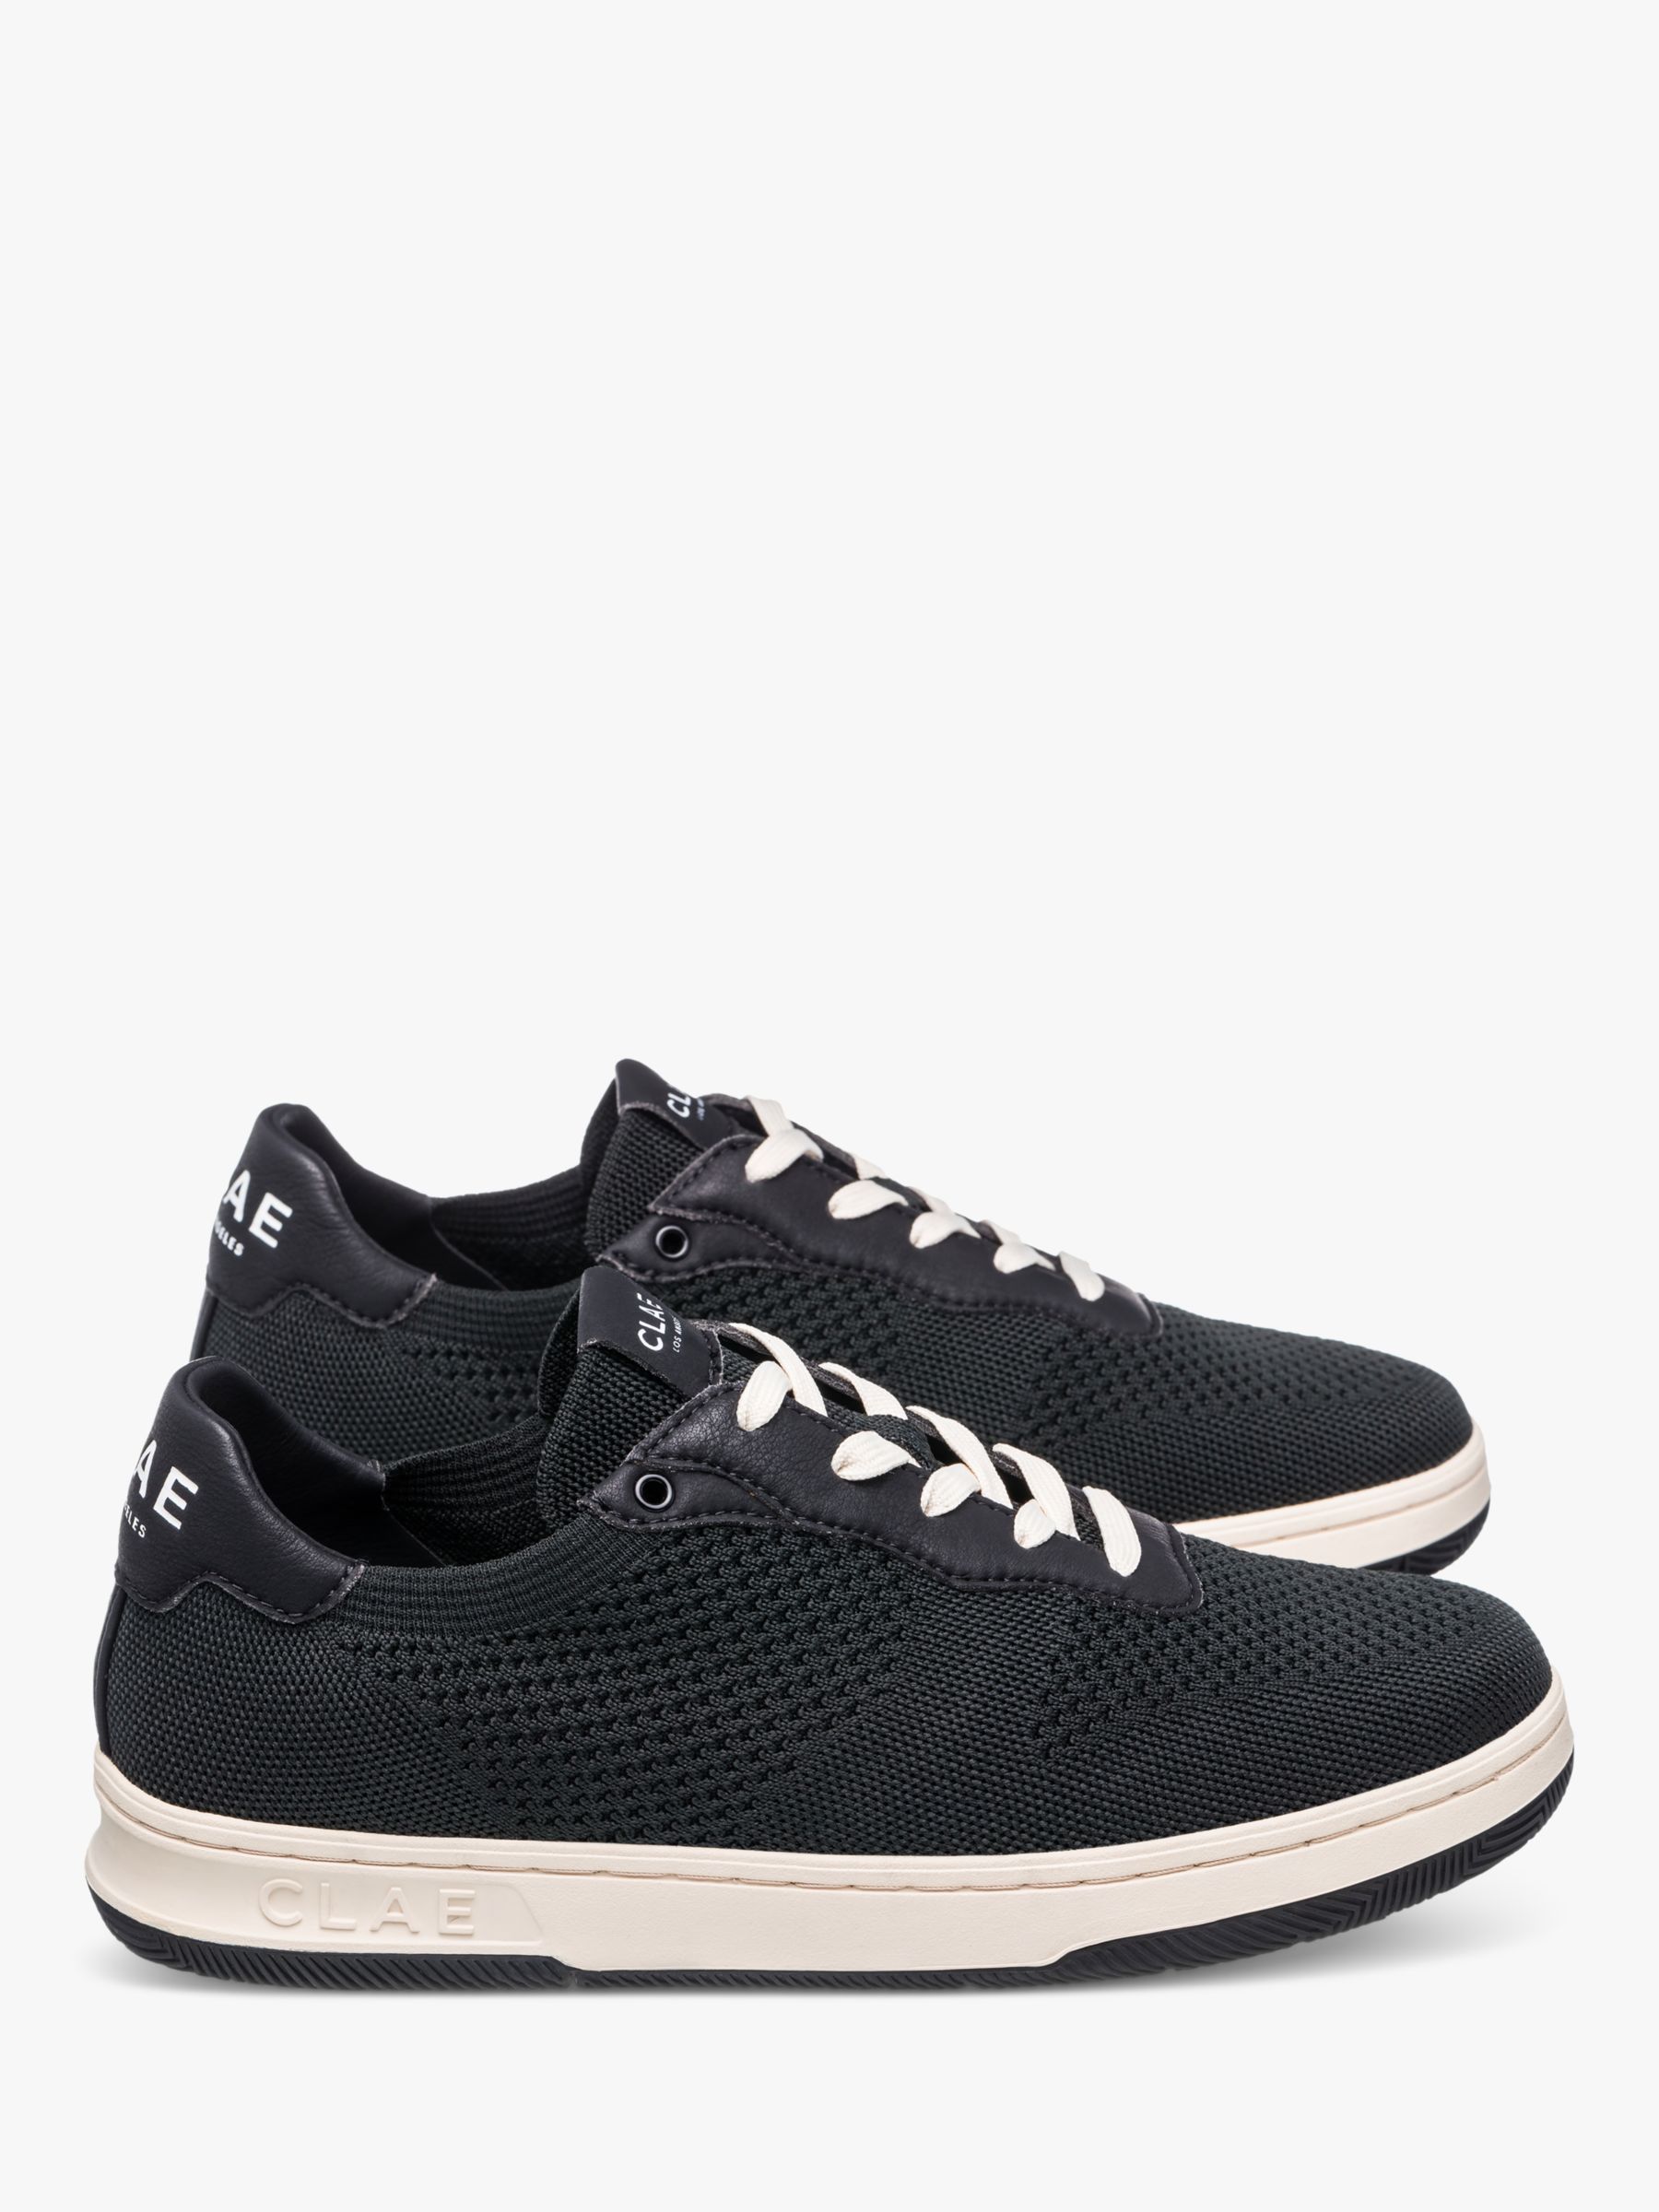 CLAE Malone Knitted Lace Up Trainers, Black, 7.5